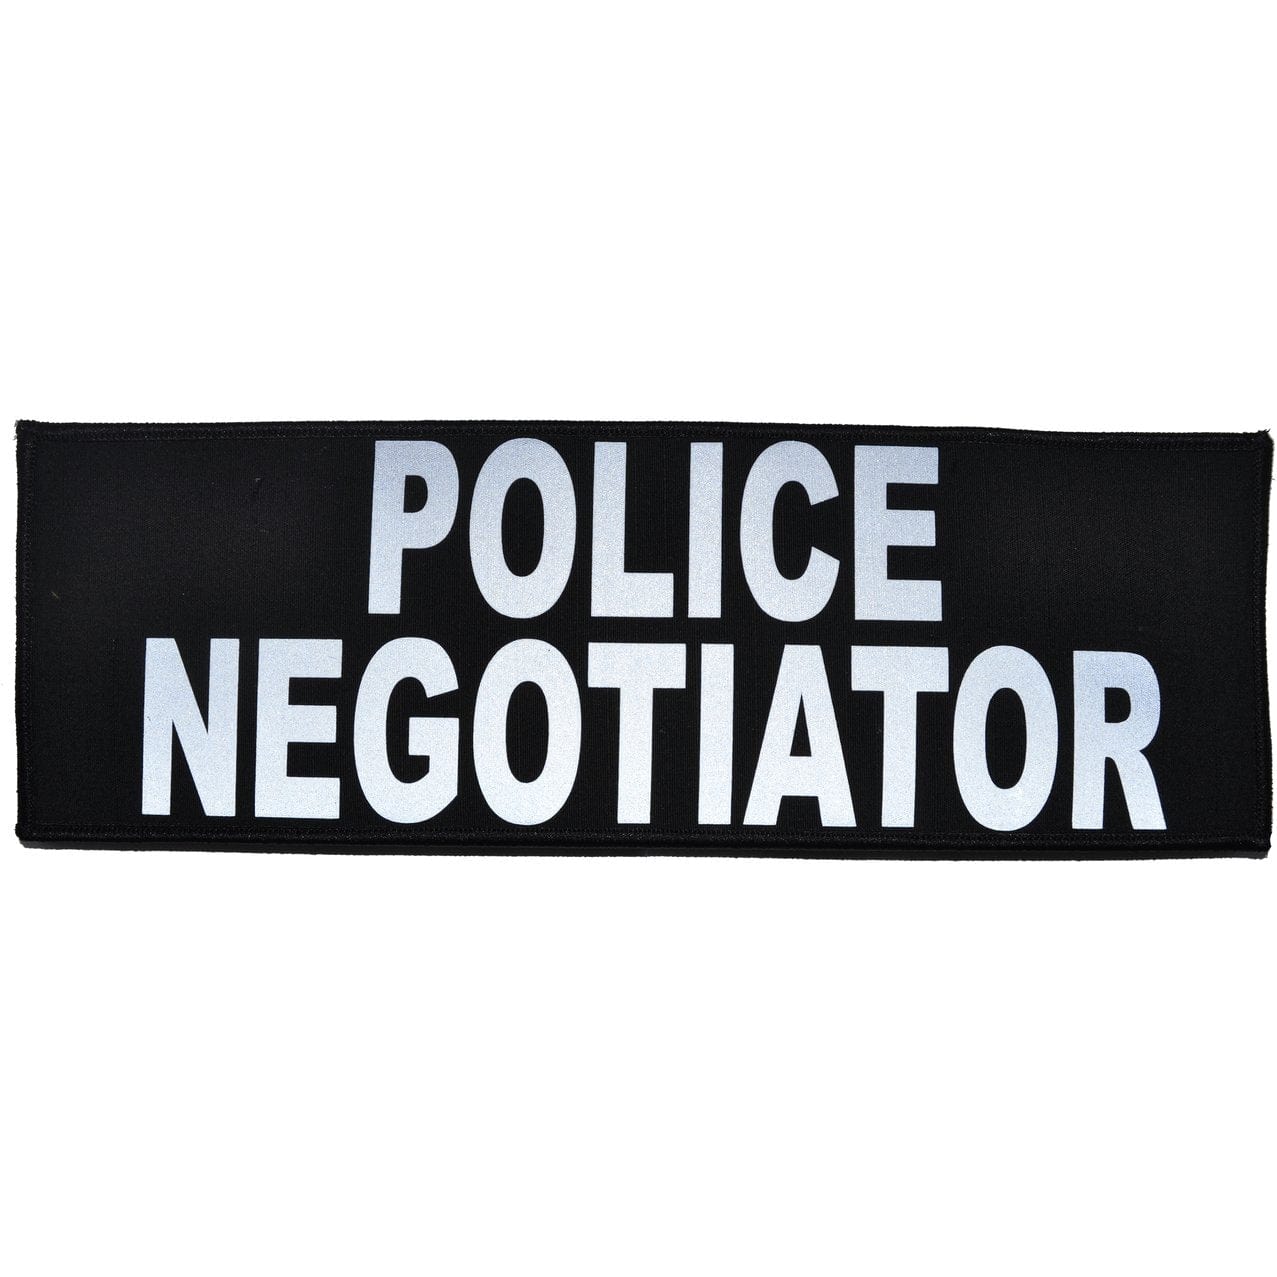 Tactical Gear Junkie Patches Police Negotiator Reflective - 4x12 Patch